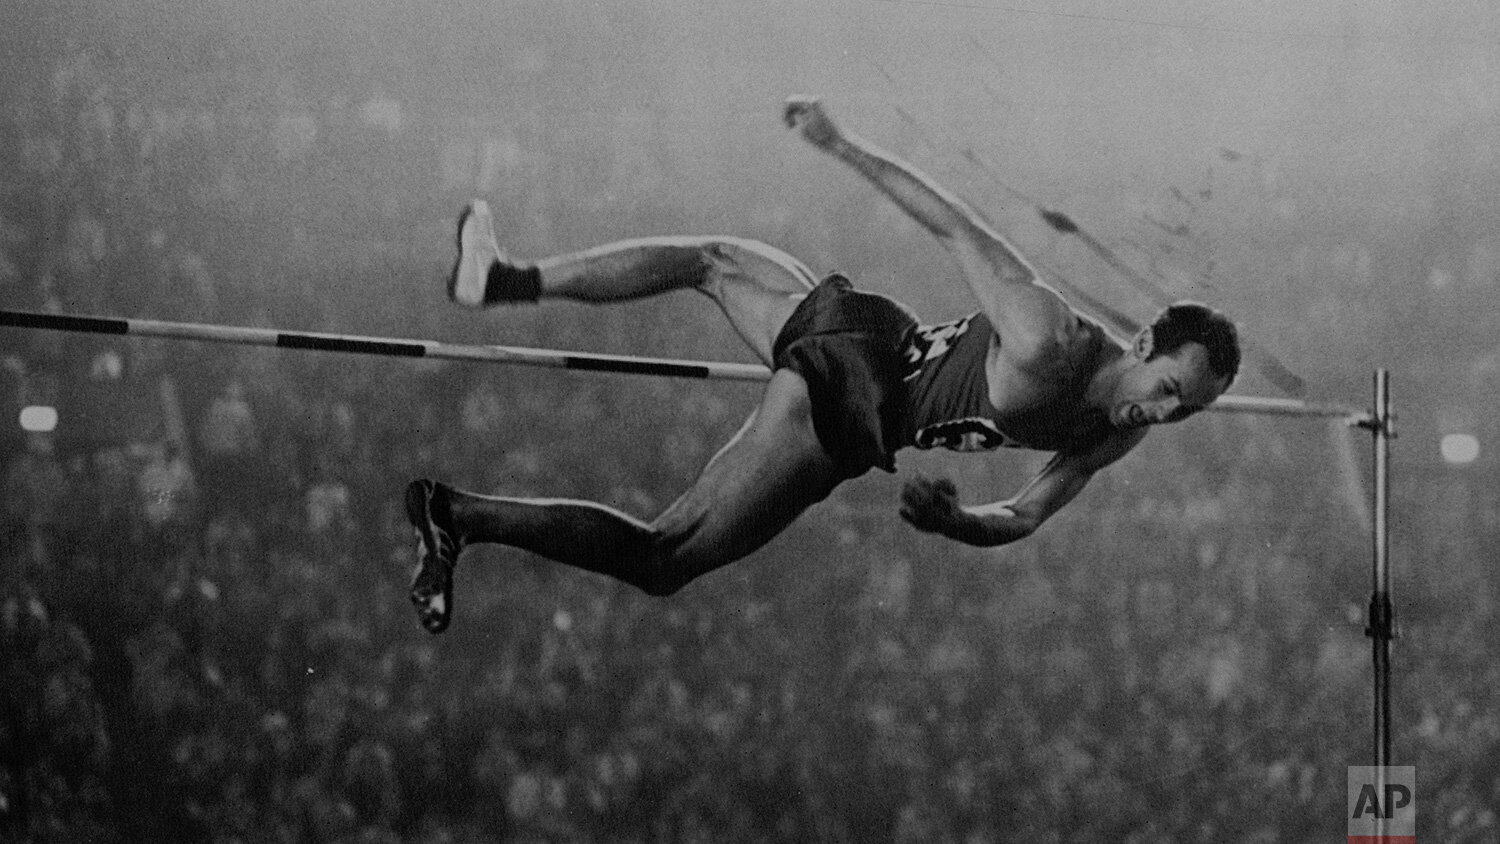  Valery Brumel of the USSR clears 7 feet, 1 3/4 inches, winning the gold medal in the high jump event in Tokyo, Japan, on Oct. 21, 1964. (AP Photo) 